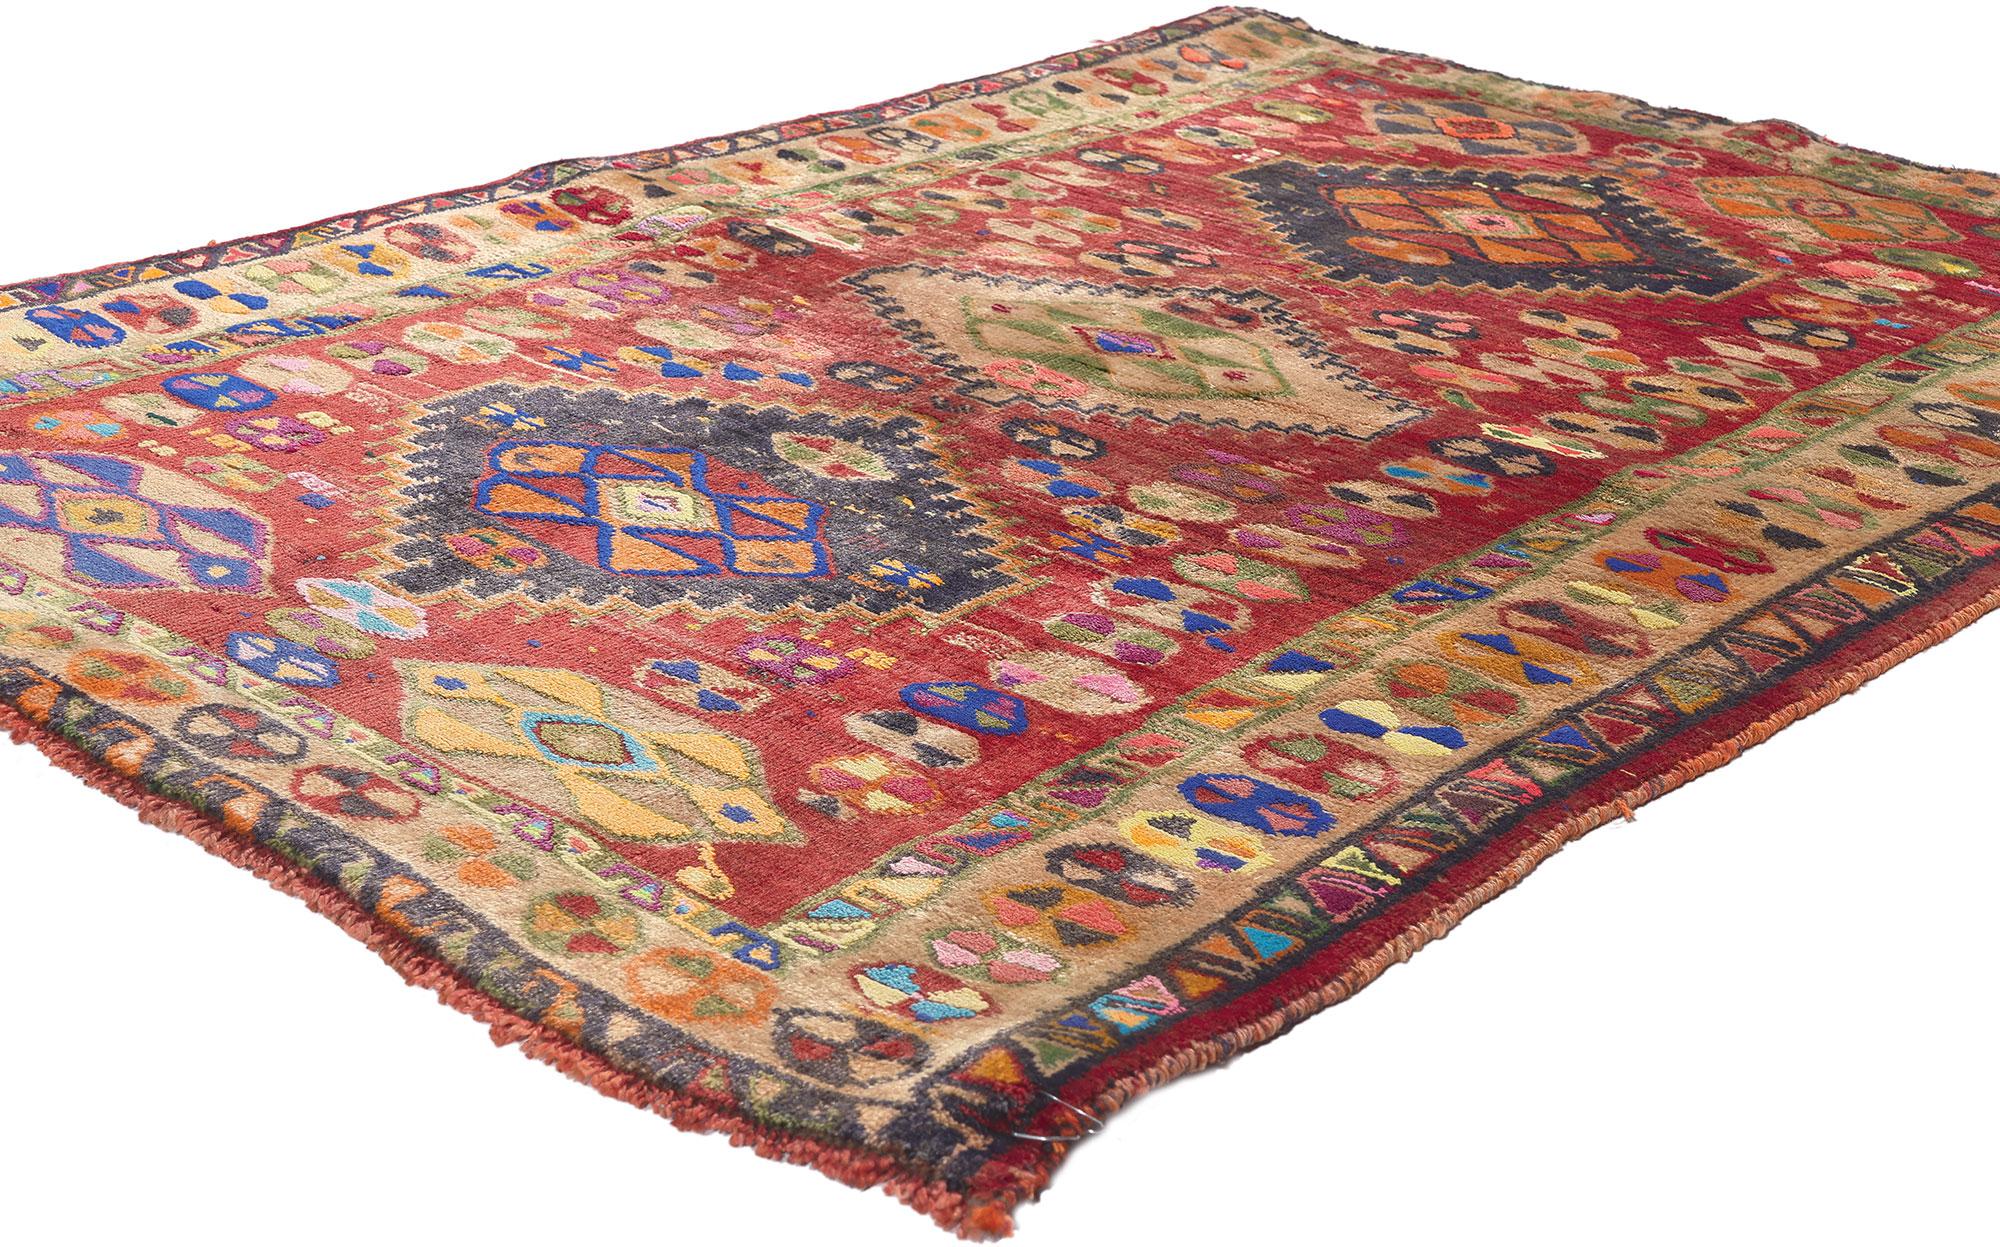 61255 Vintage Persian Shiraz Rug, 03'05 x 04'11.
Nomadic charm meets Maximalist style in this hand knotted wool vintage Persian Shiraz rug. The intrinsic tribal pattern and saturated colors woven into this piece work together creating layers of joy